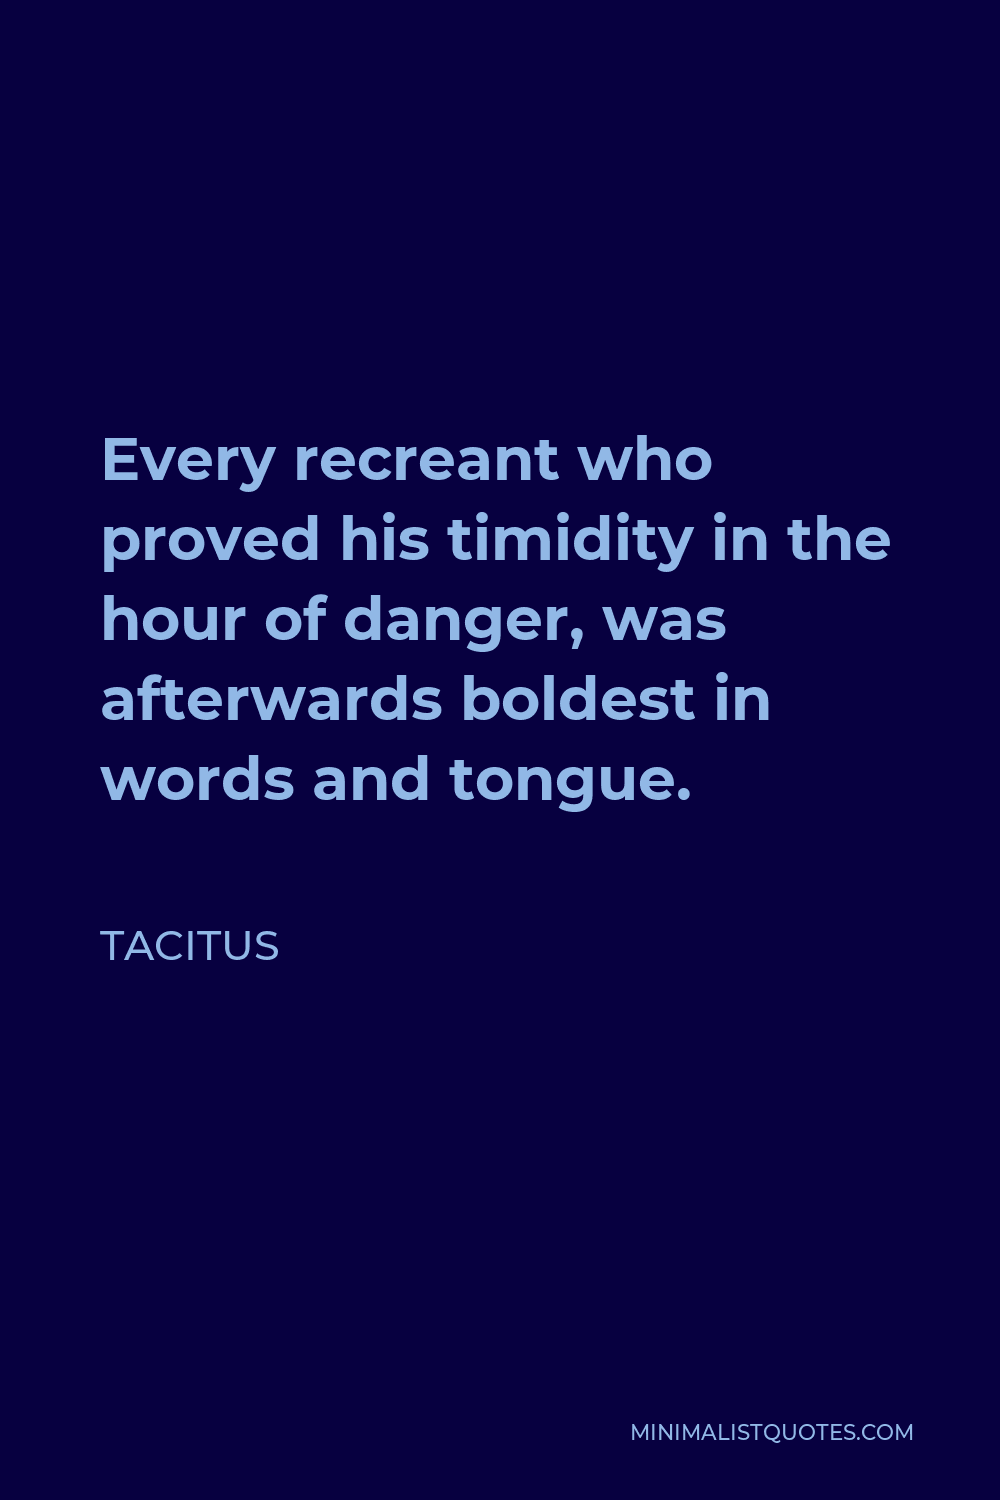 Tacitus Quote - Every recreant who proved his timidity in the hour of danger, was afterwards boldest in words and tongue.